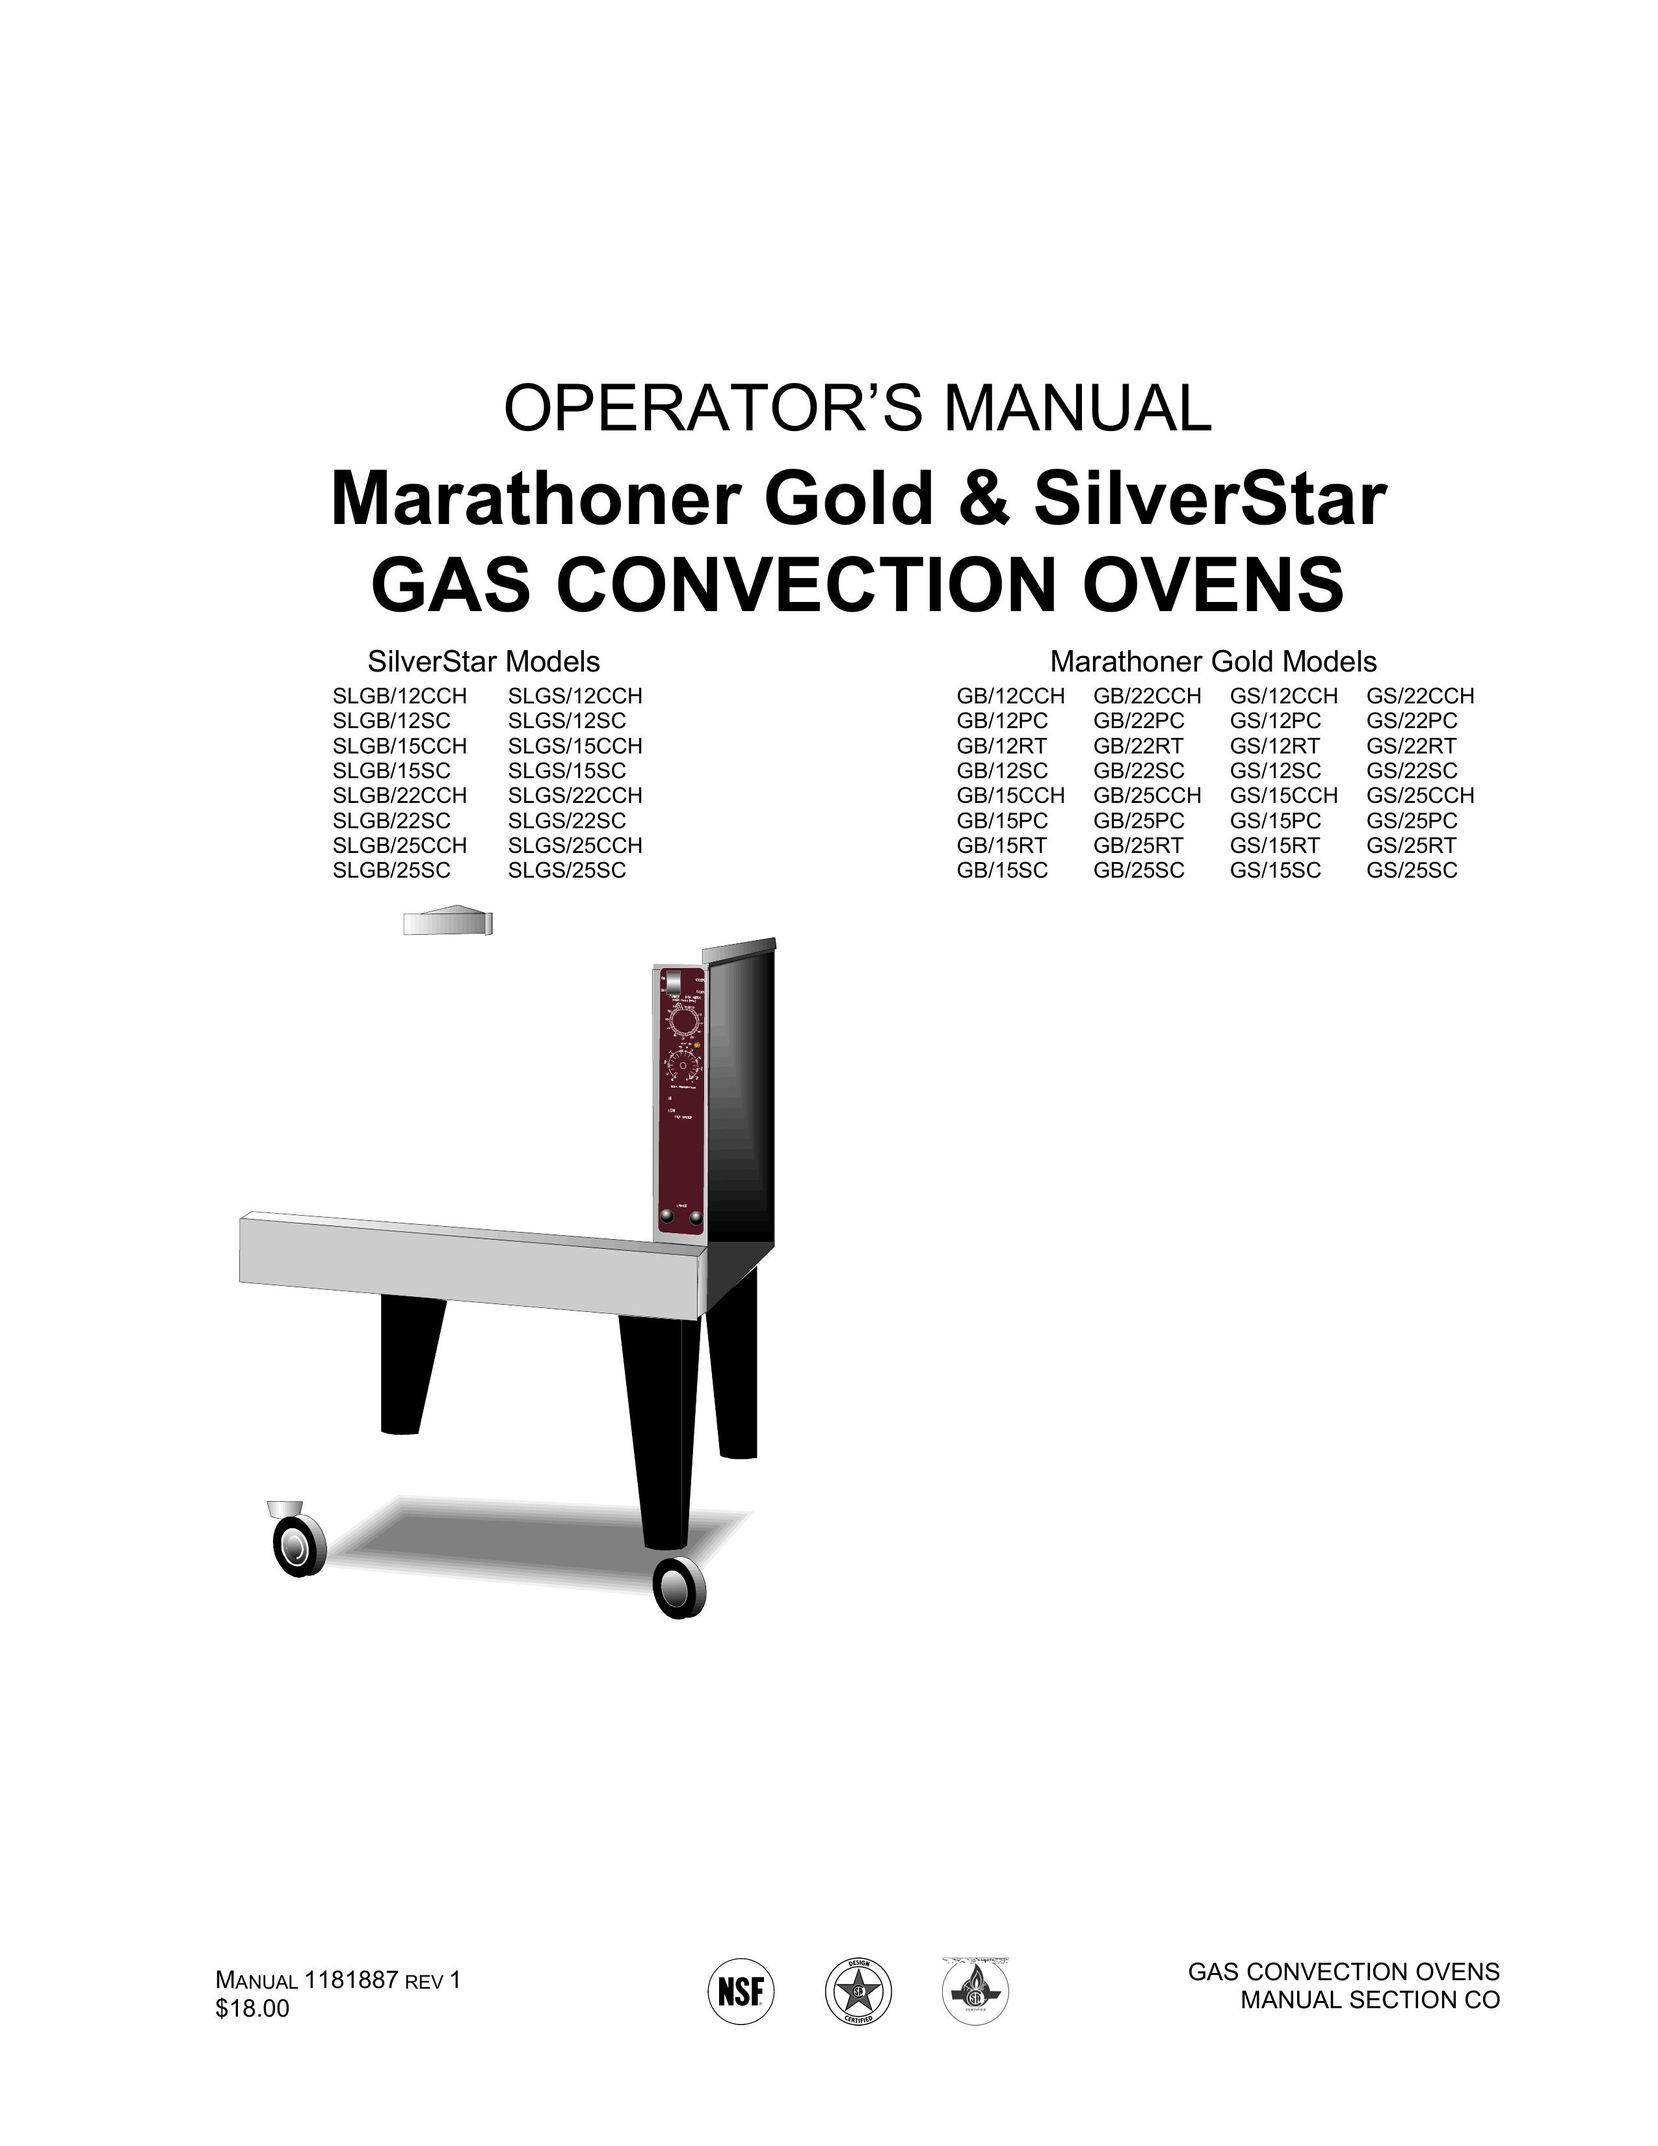 Southbend SLGS/12SC Oven User Manual